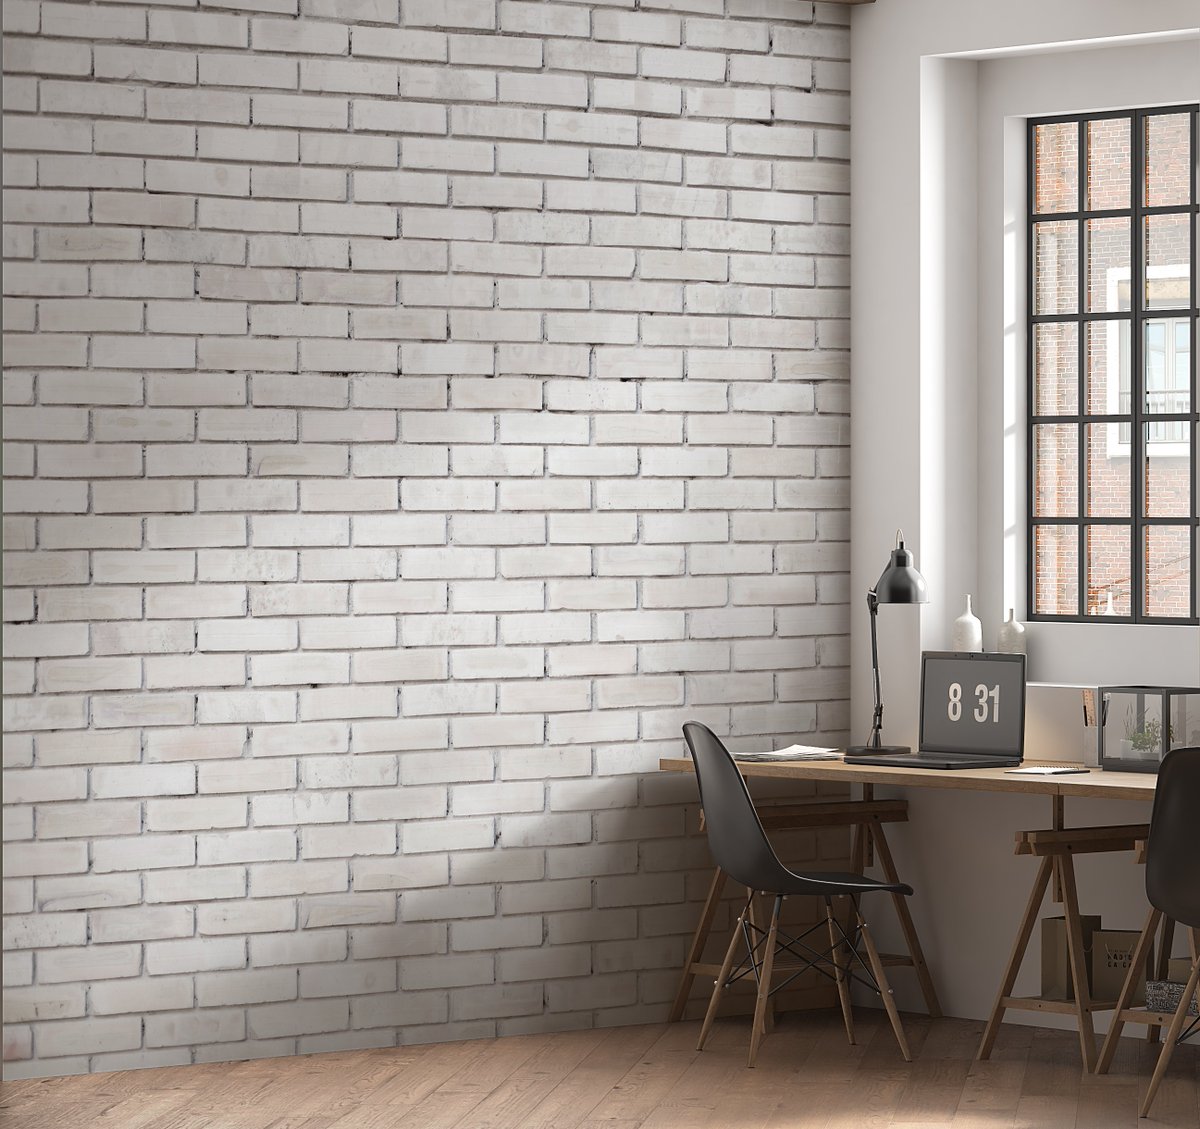 Revamp your space with White Faded Brick Wallpaper Mural - a timeless, chic look! #WallpaperMural #HomeDecor #WhiteBrick #InteriorDesign #ModernHome #WallArt #RoomMakeover #HomeStyle #ChicWalls #FadedBrick #WallpaperDesign #ElegantInteriors

giffywalls.com/white-concrete…